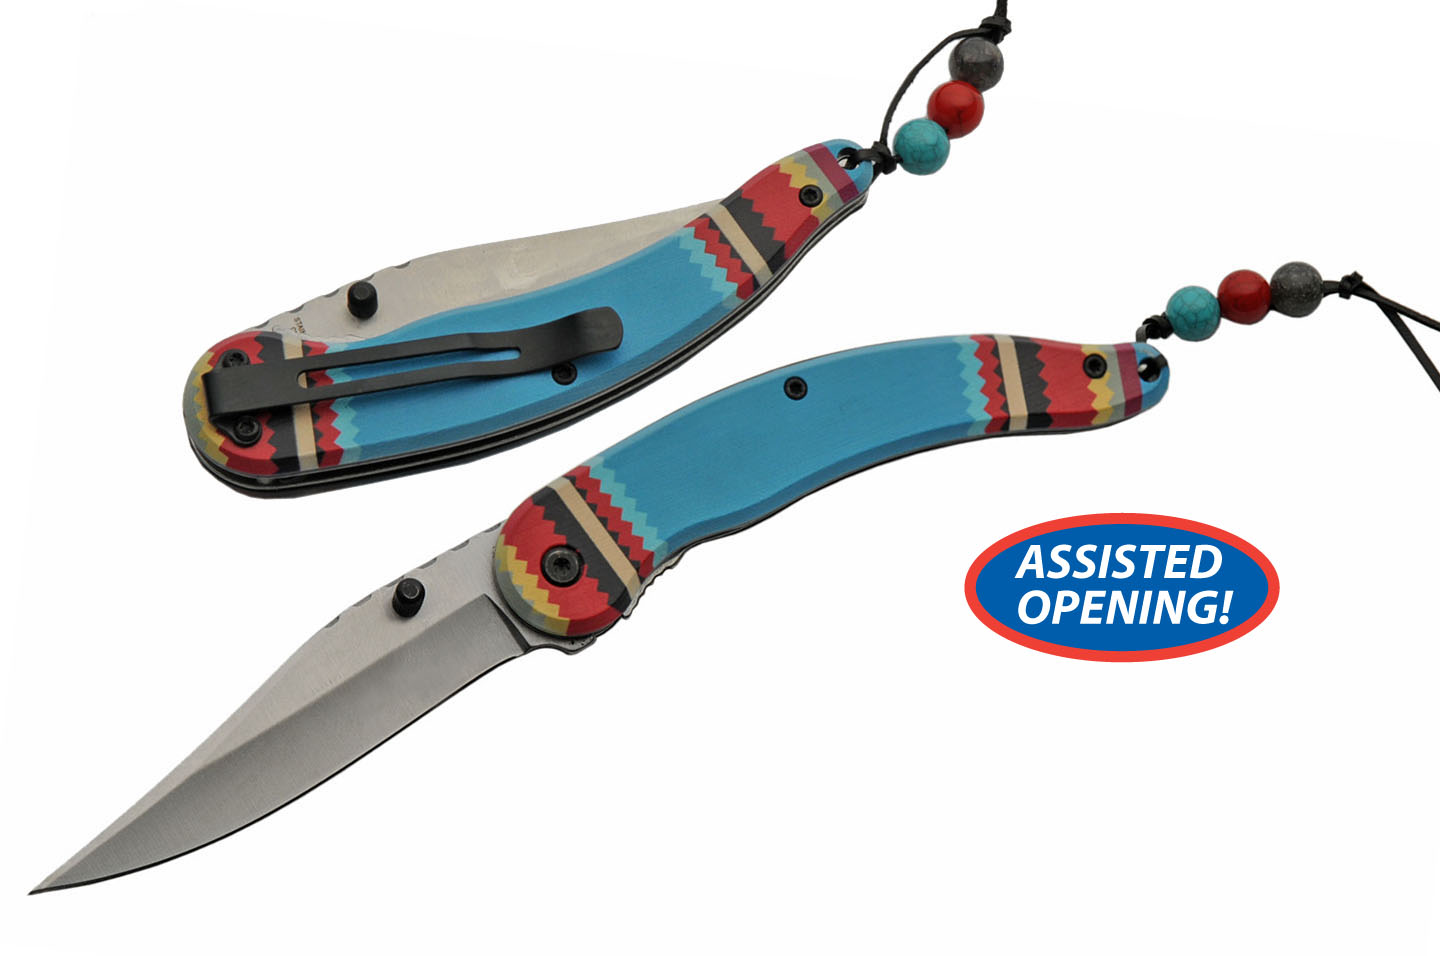 Spring-Assist Folding Pocket Knife | Native American Turquoise Wood Silver Blade